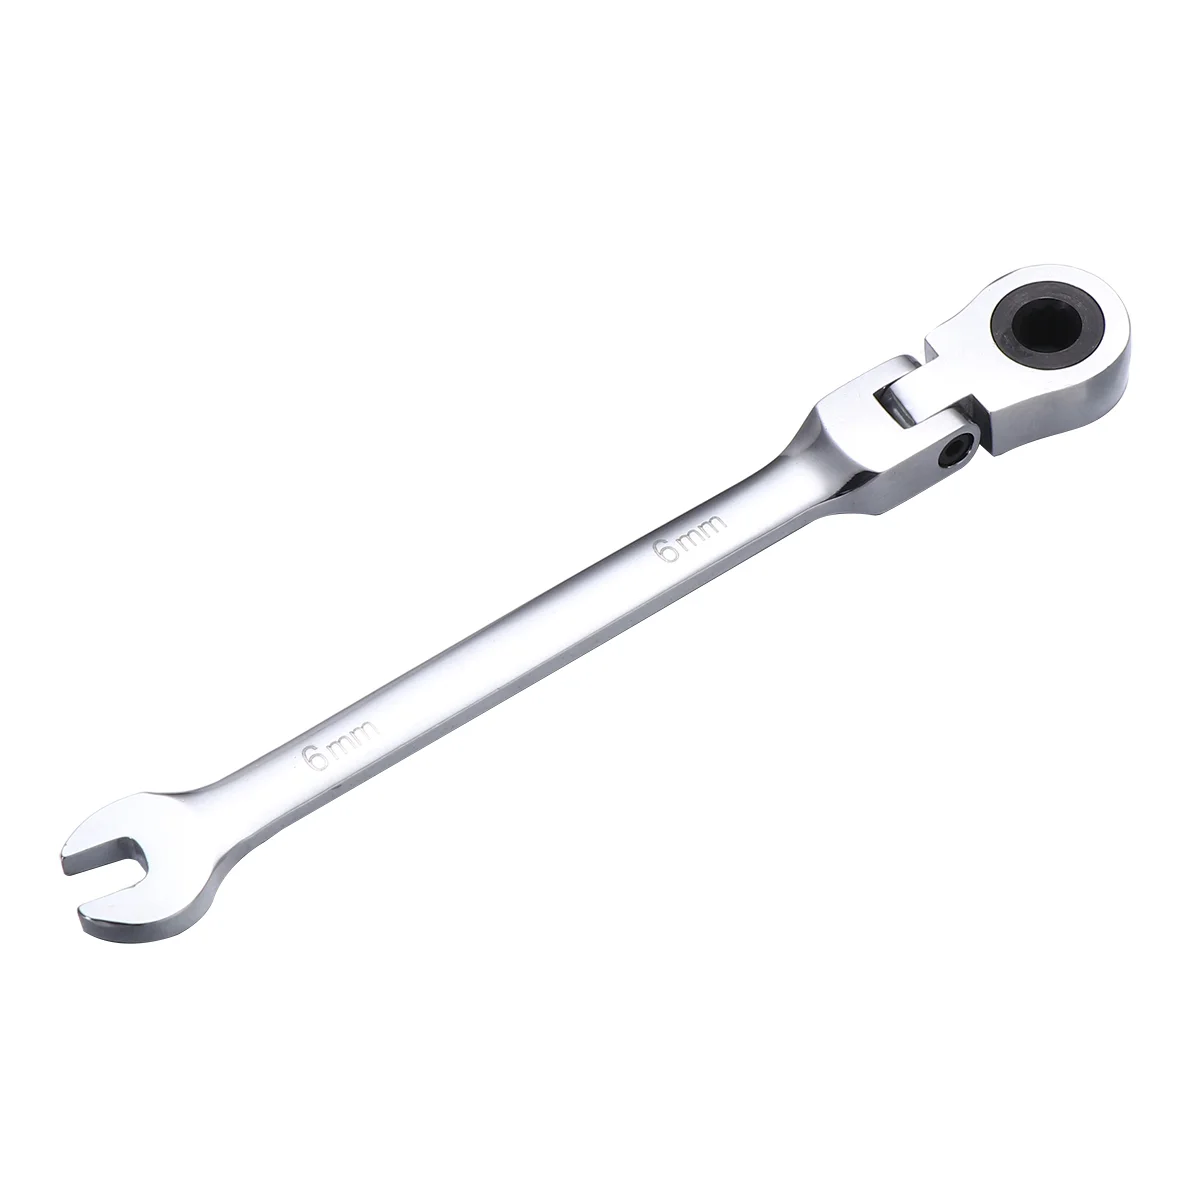 

6mm Dual Heads Ratchet 180 Degree Flexible Pivoting Head Adjustable Combination Dicephalous Wrench Spanner (Silver)